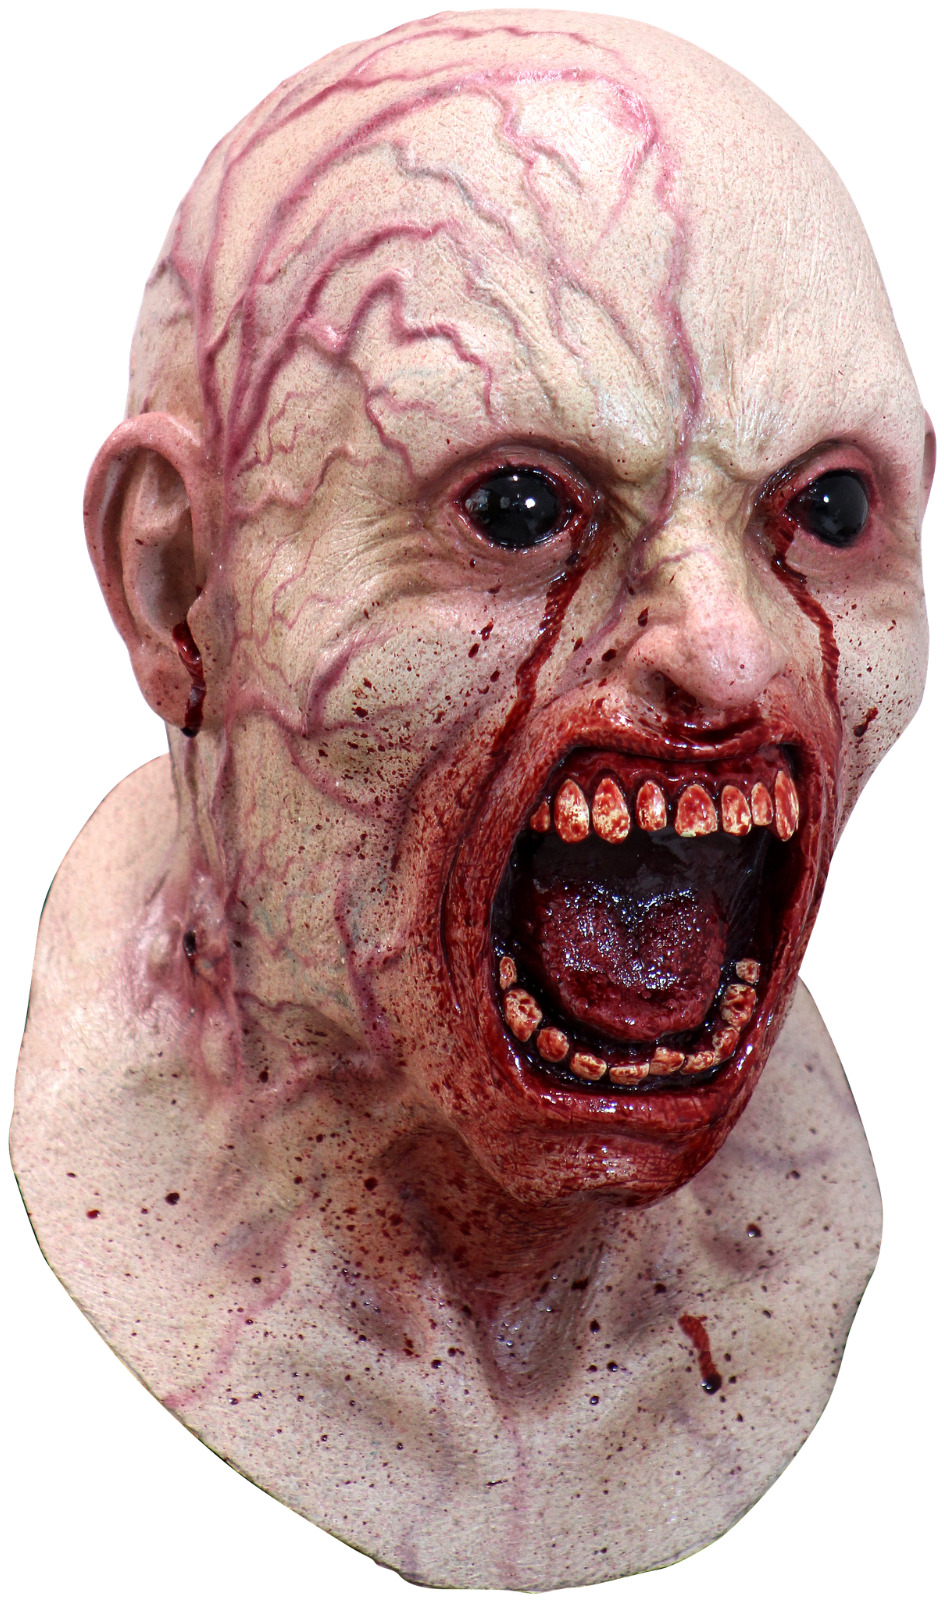 Halloween INFECTED SHOCKING Latex Deluxe Mask Ghoulish Productions Zombie